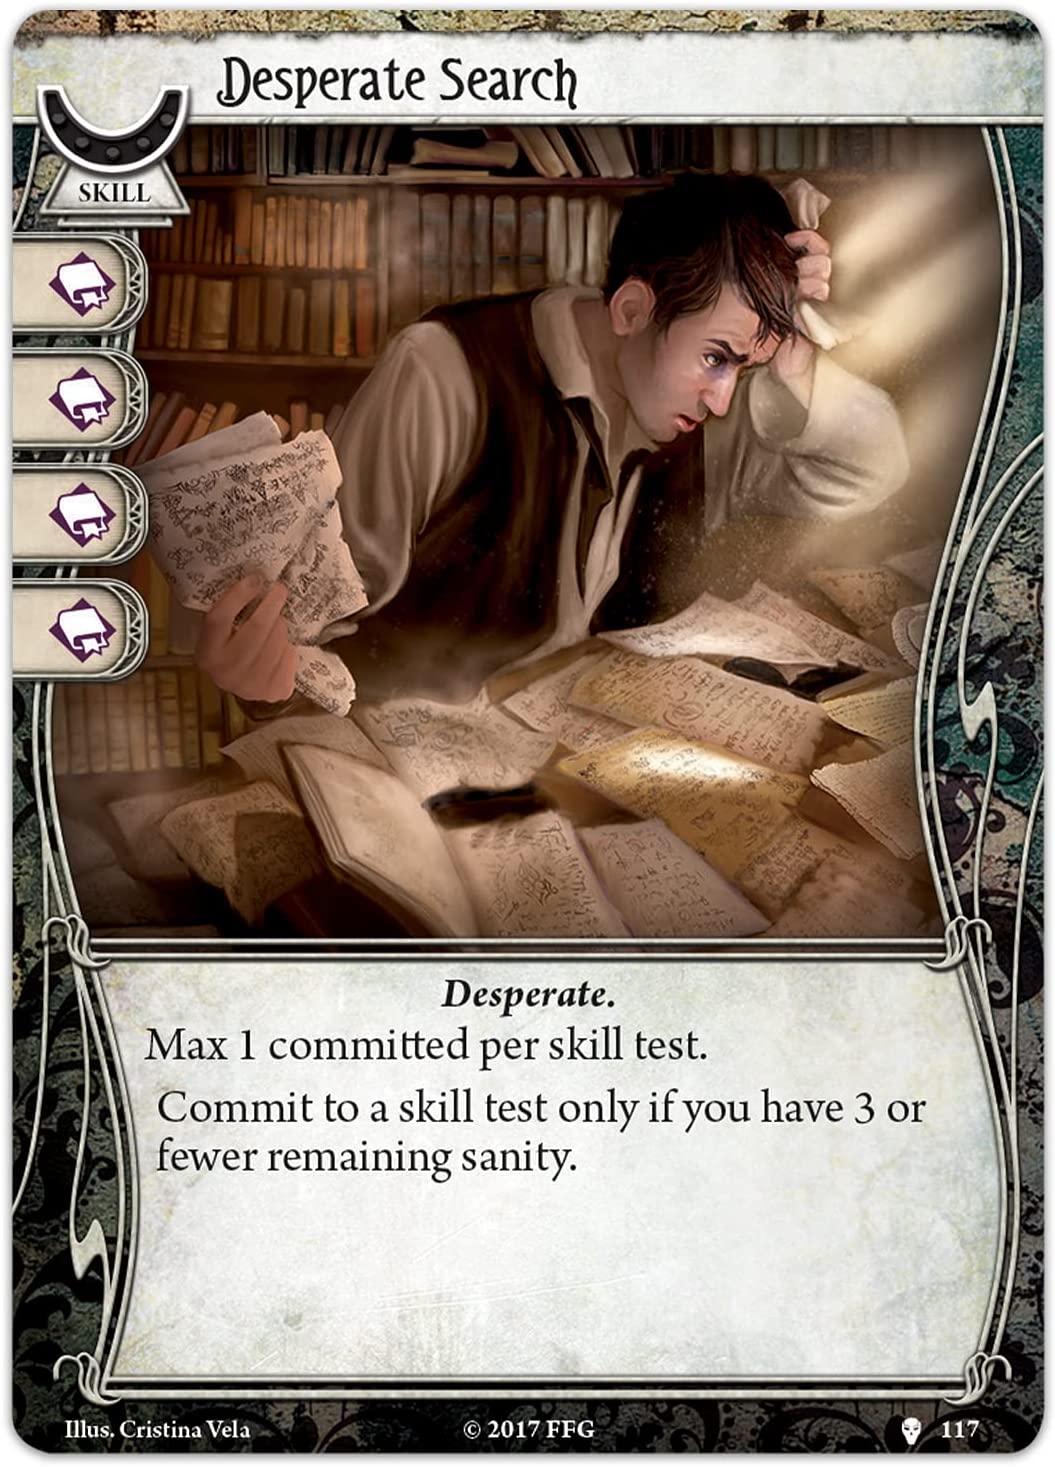 Arkham Horror LCG: Echoes of the Past Mythos Pack-Erweiterung